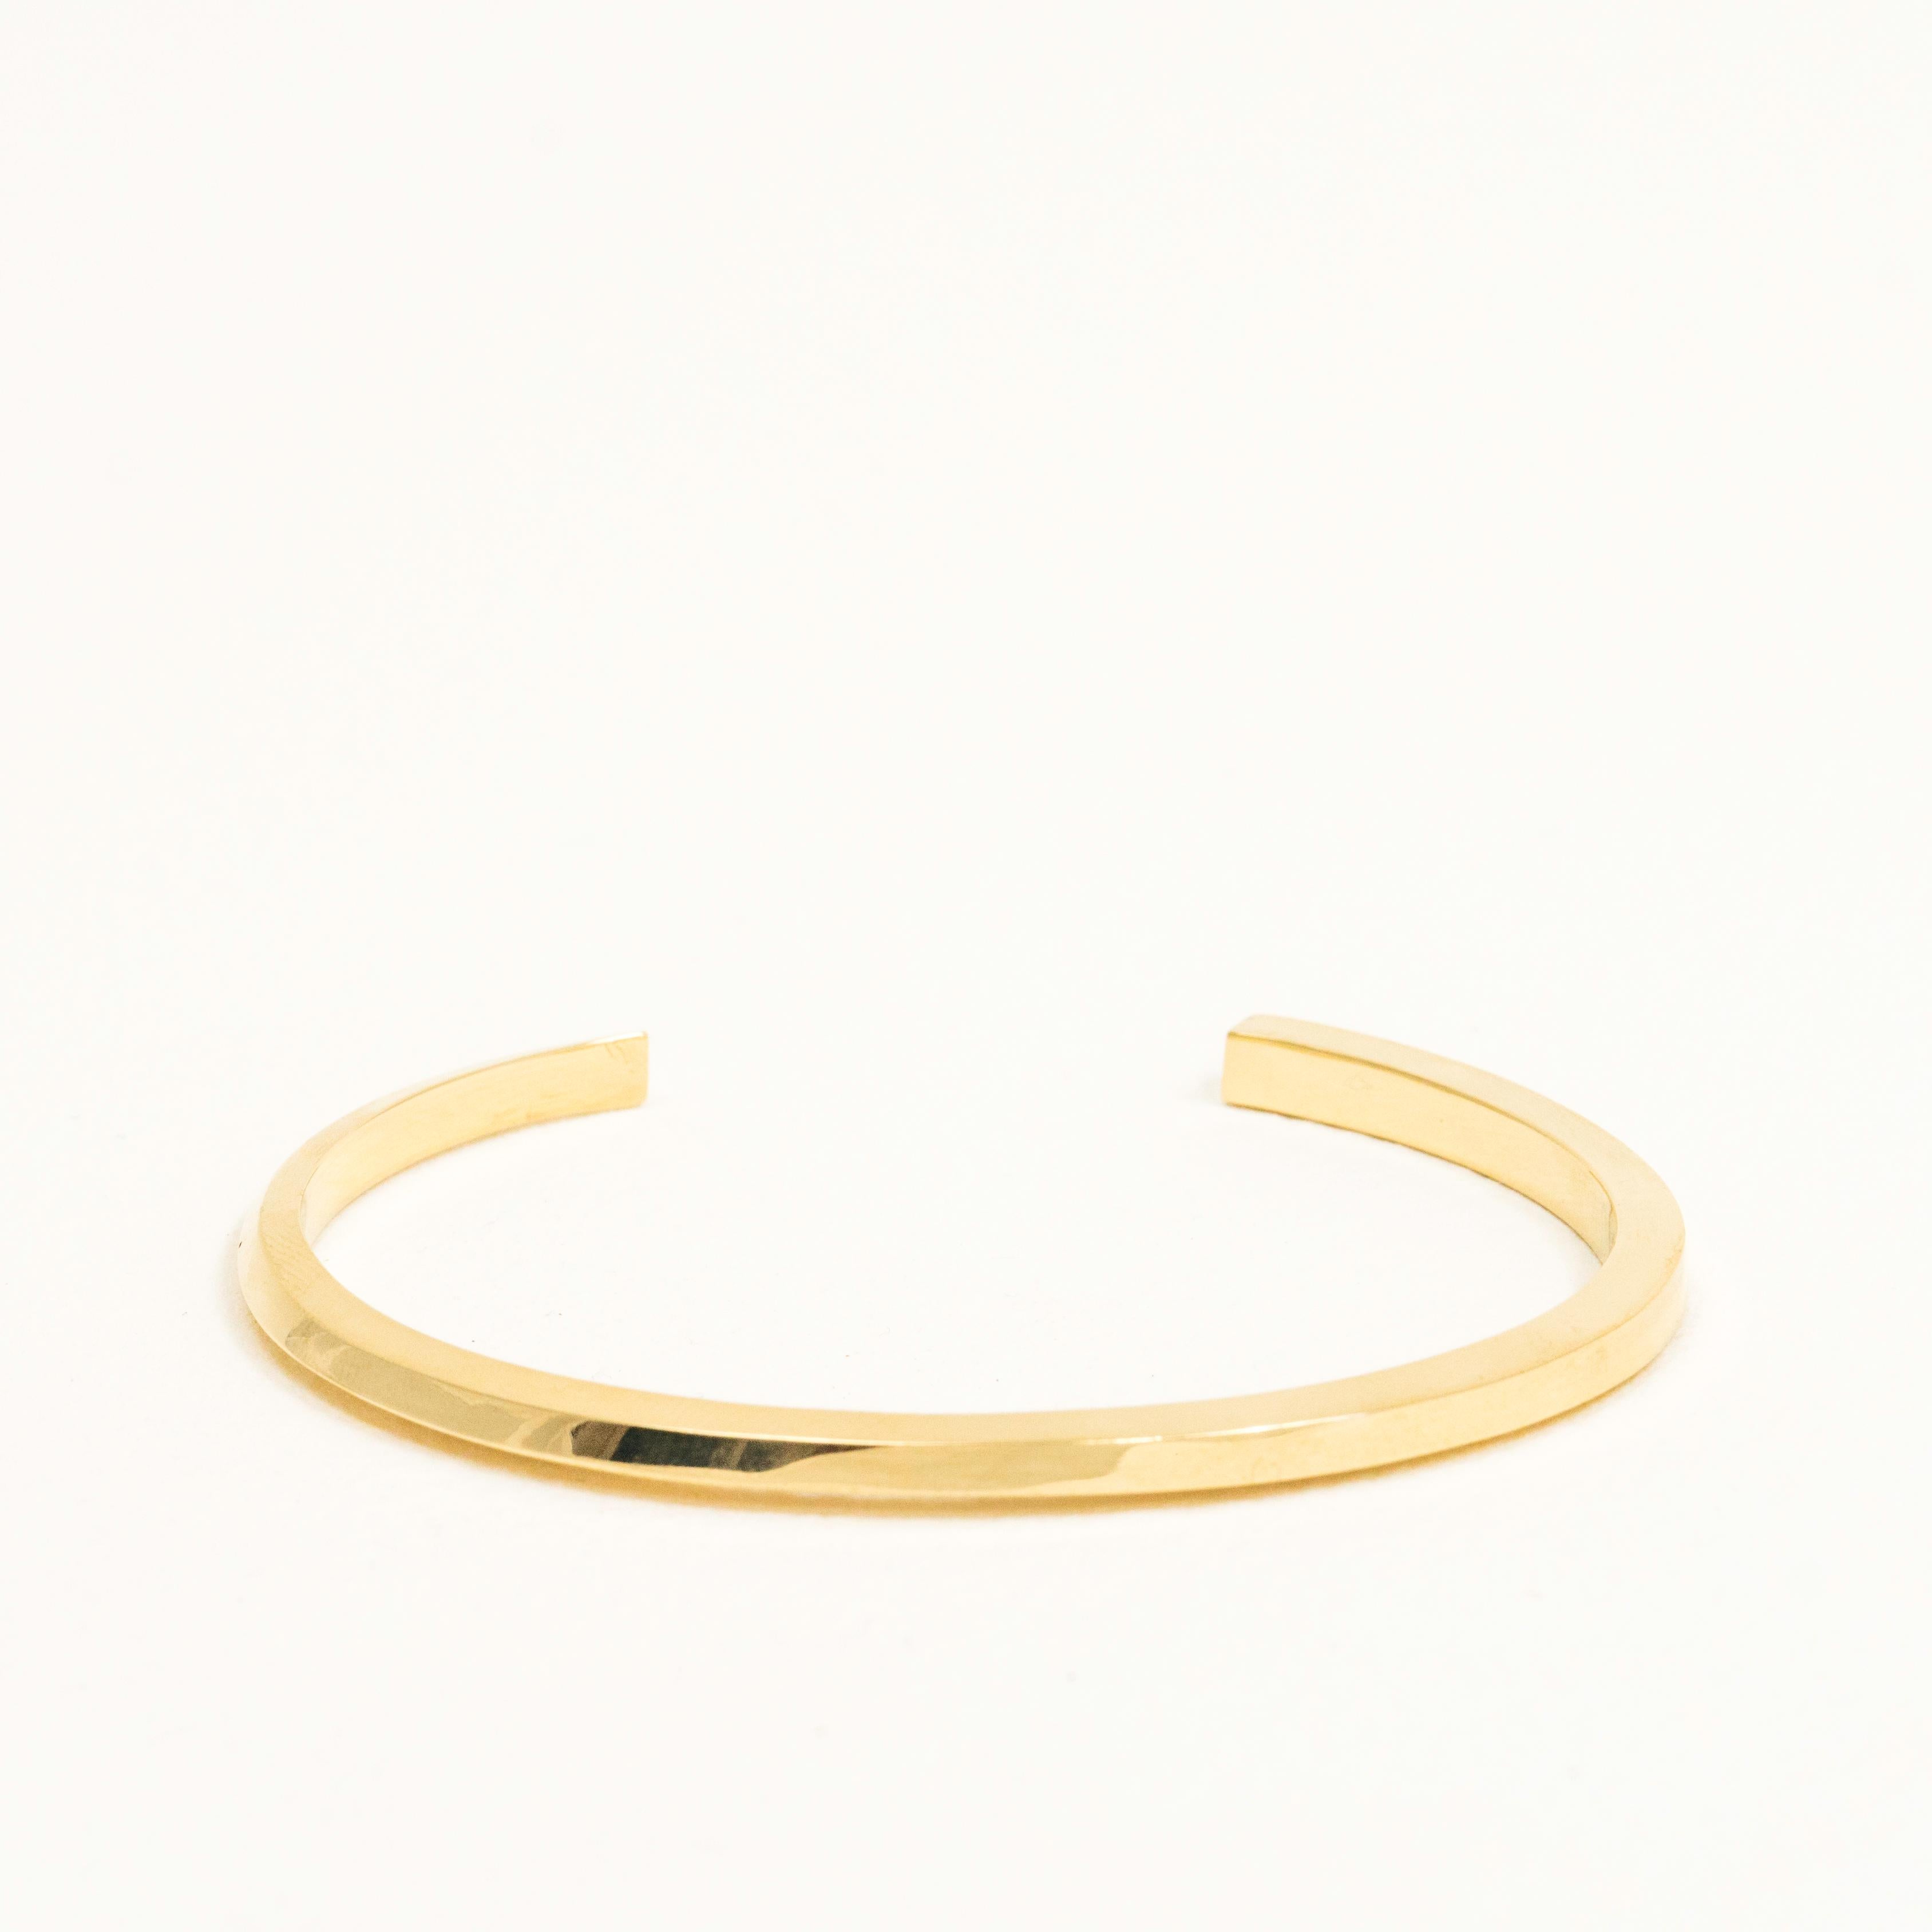 The Flow Cuff Bracelet in solid 14k gold begins as a triangle and evolves into a square at its opposite end. This elegant bracelet can blend seamlessly into any style or become a brilliant minimalist statement piece on its own. The cuff bracelet is